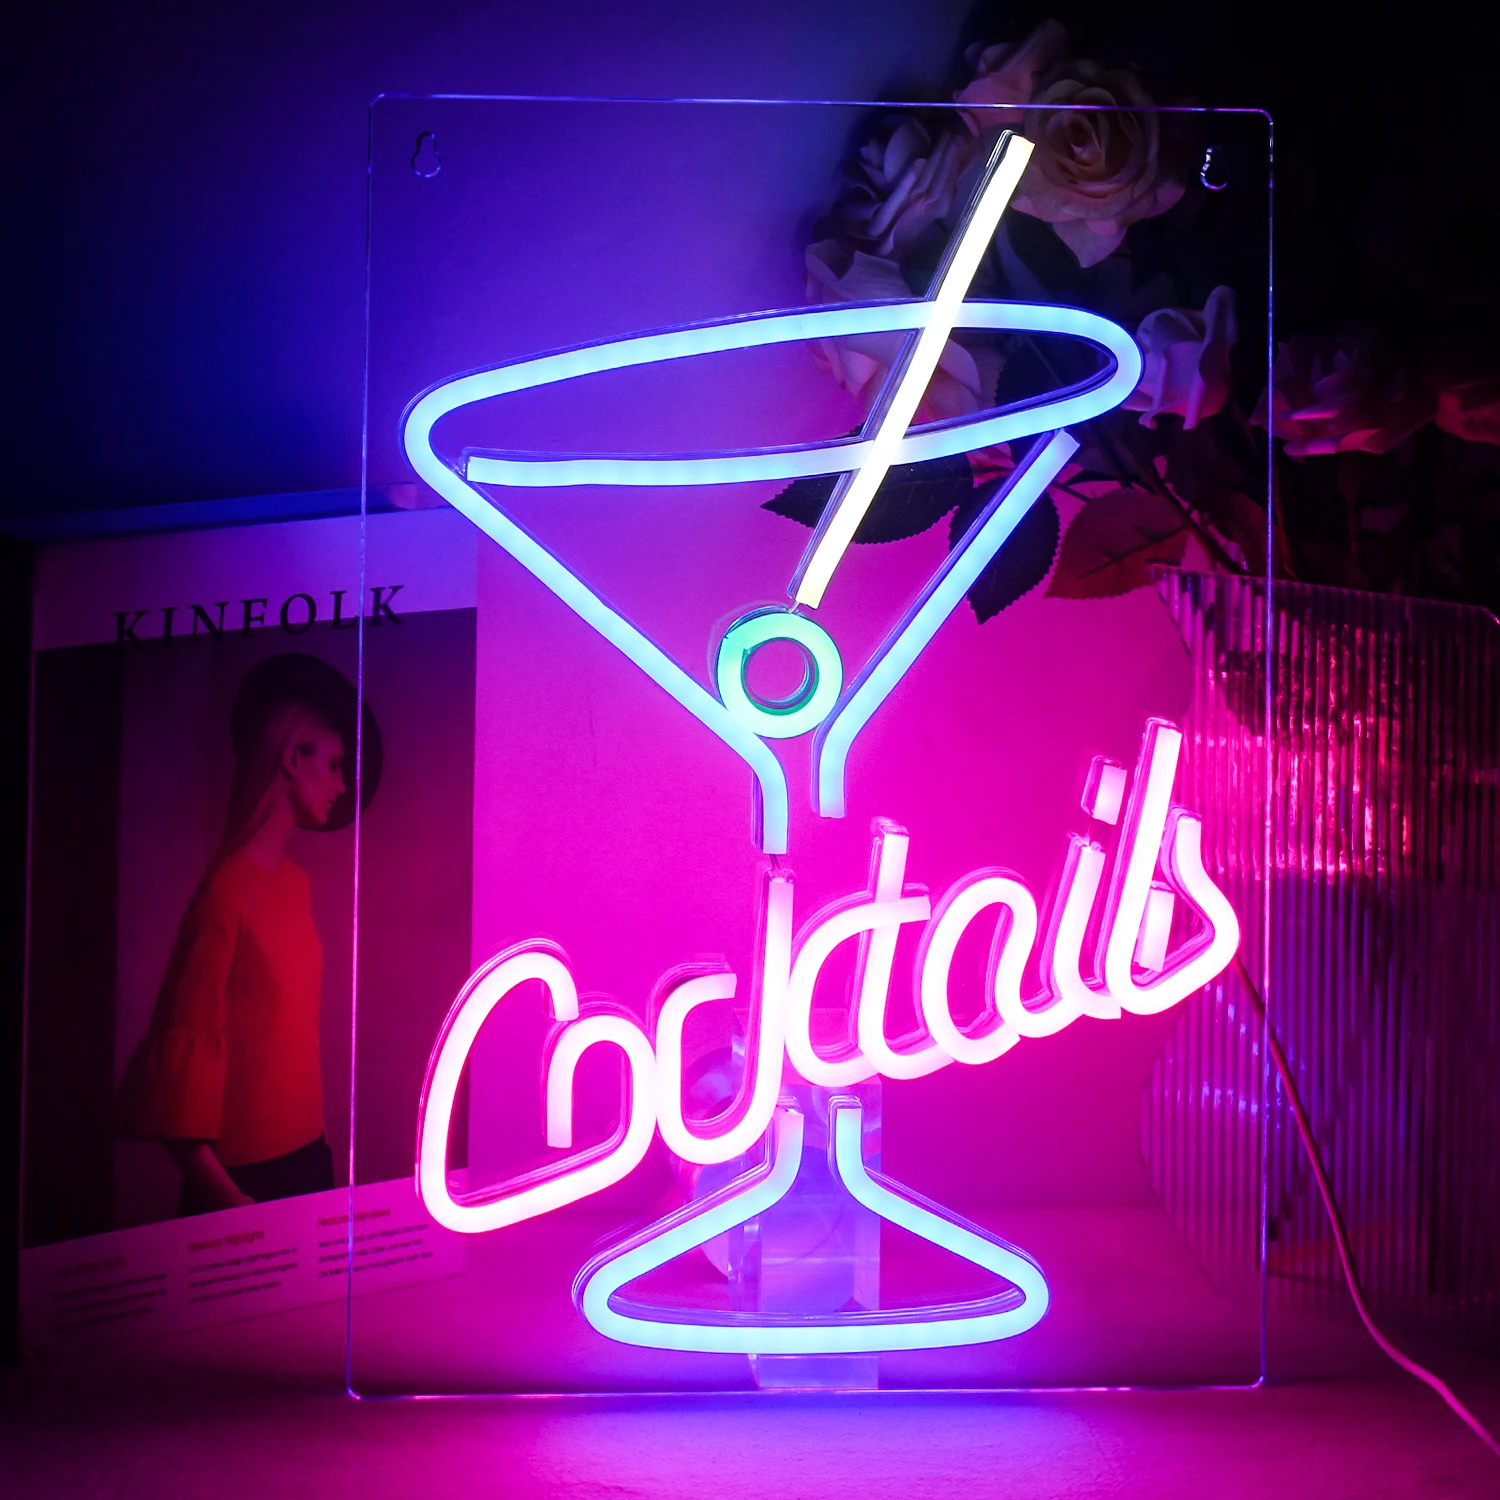 Ineonlife Cocktail Neon Sign Led Llight Glass Acrylic Pub Beach Shop Office Restaurant Concert Hall Party Wall Decor Lamps Gift